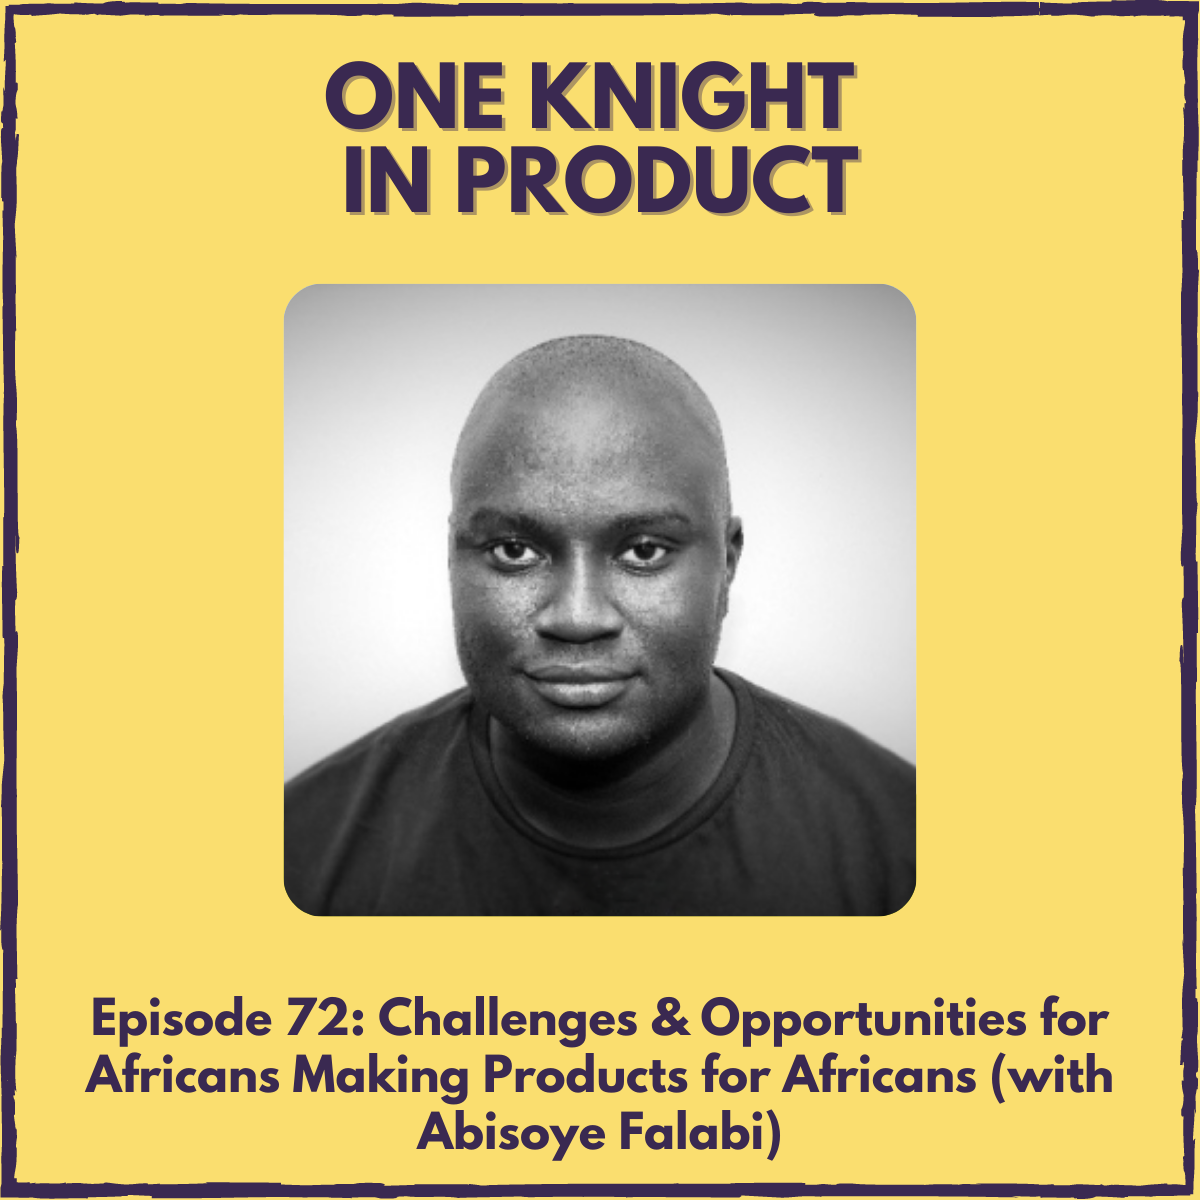 Challenges & Opportunities for Africans Making Products for Africans (with Abisoye Falabi, Senior PM @ TradeDepot)